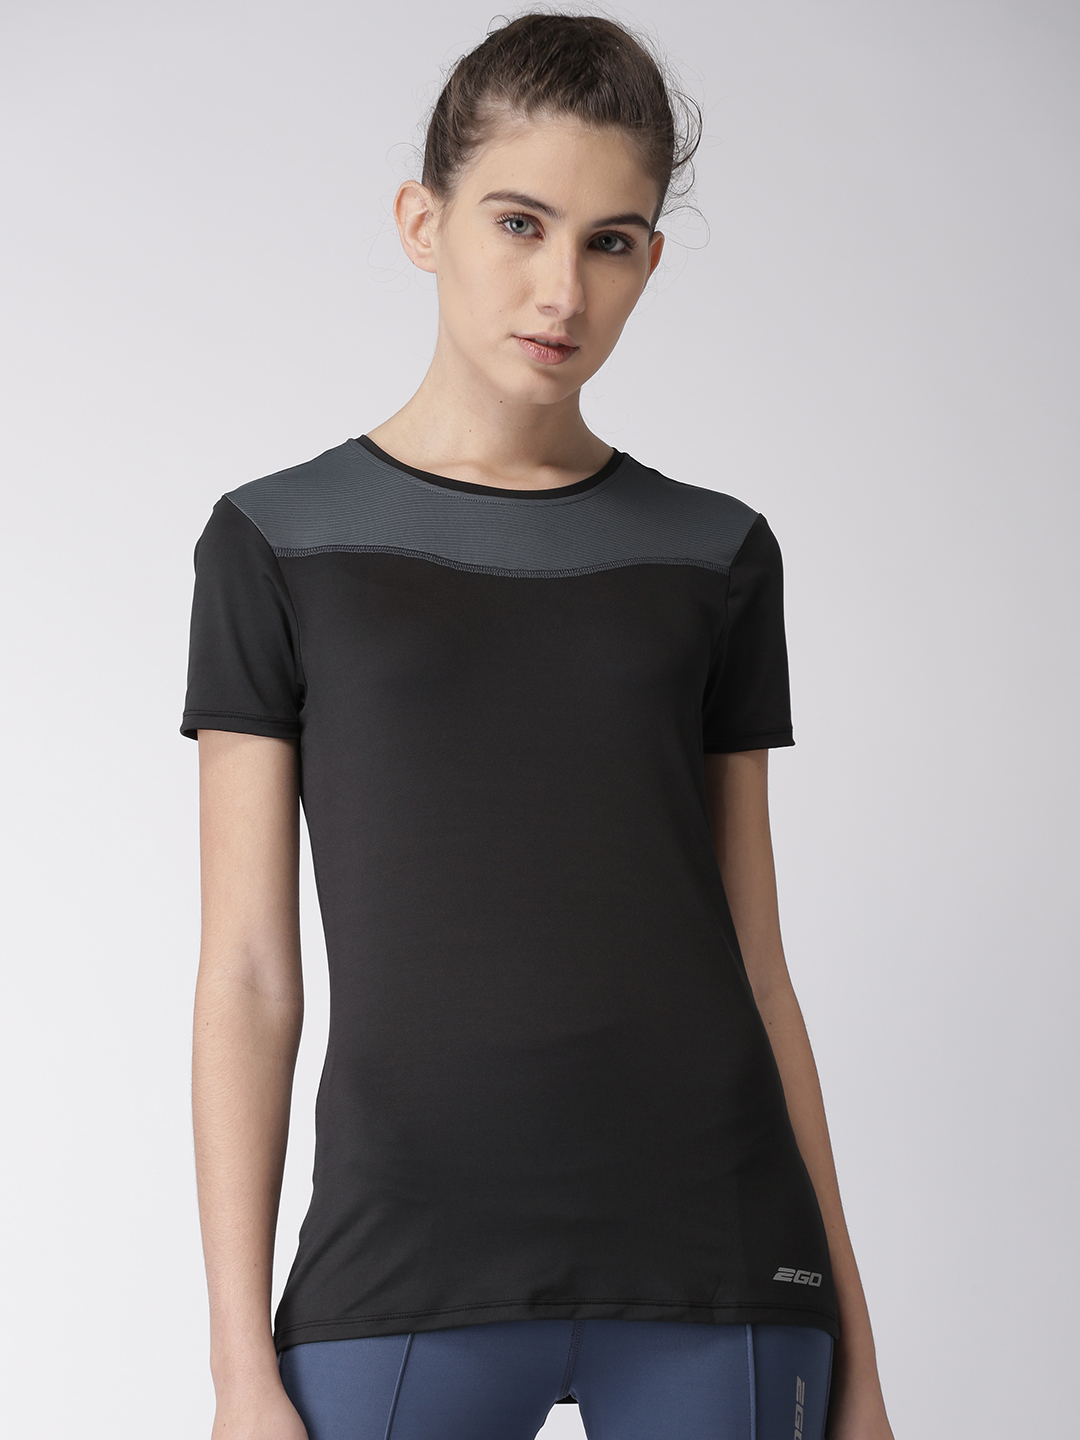 2GO Women Black Solid GO-DRY Training T-shirt Price in India